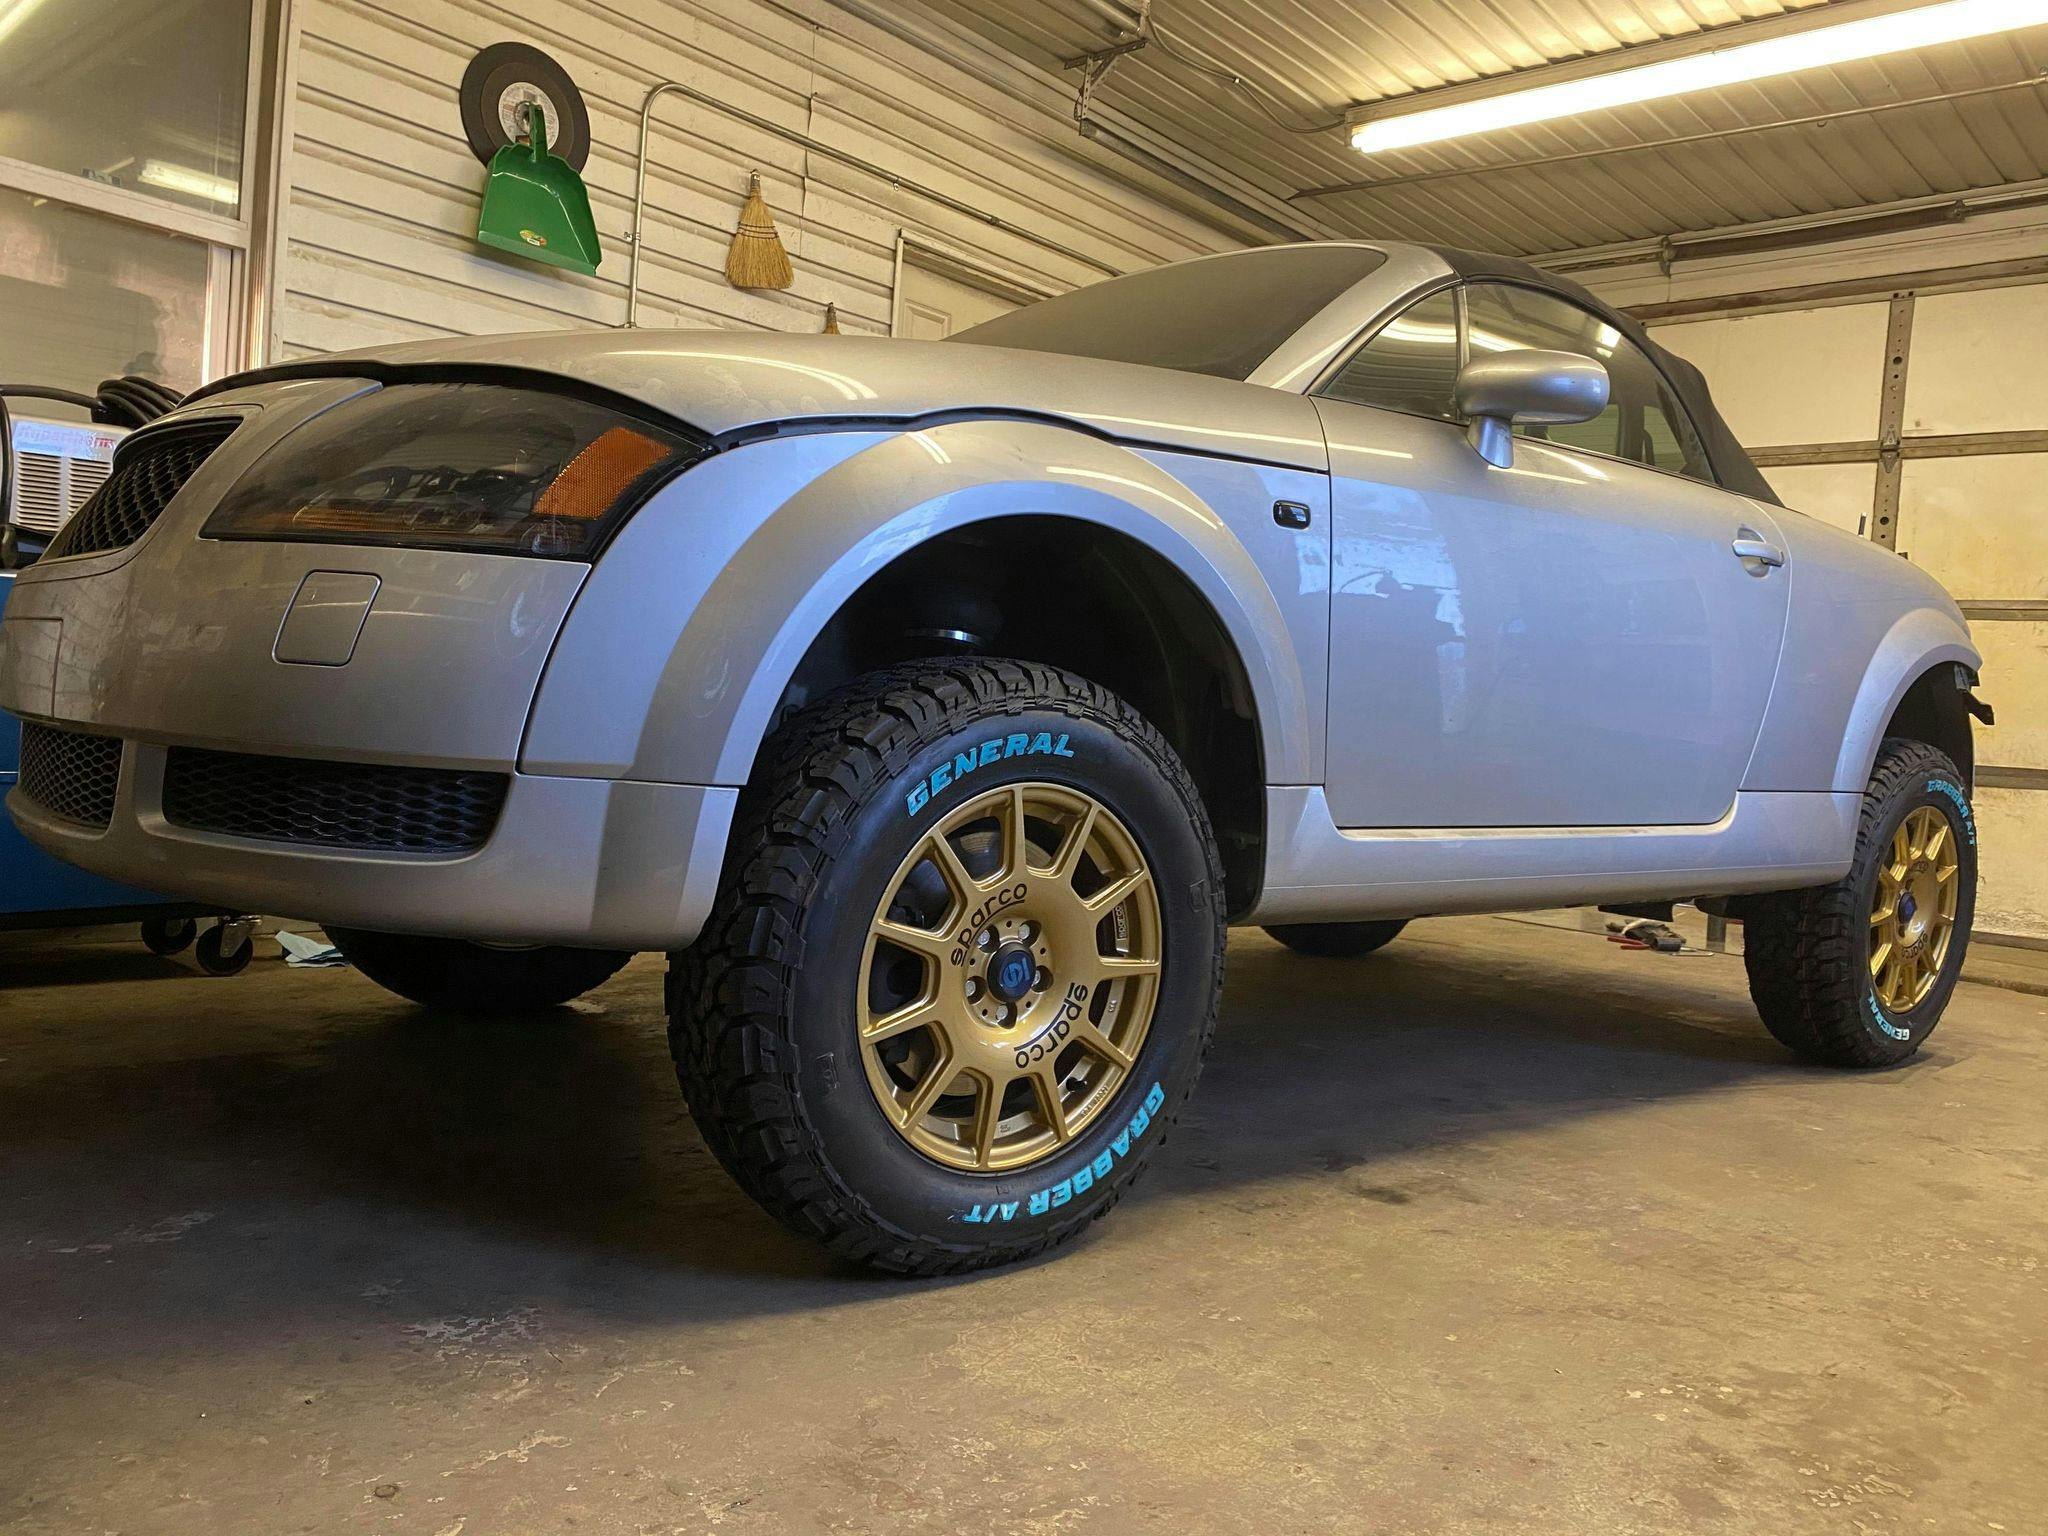 With air suspension and oversized tires, Troy Unruh has radically reimagined this Audi TT into an off-road outfit that can handle mud and snow. The heater is strong enough for cruising with the top down during the winter.